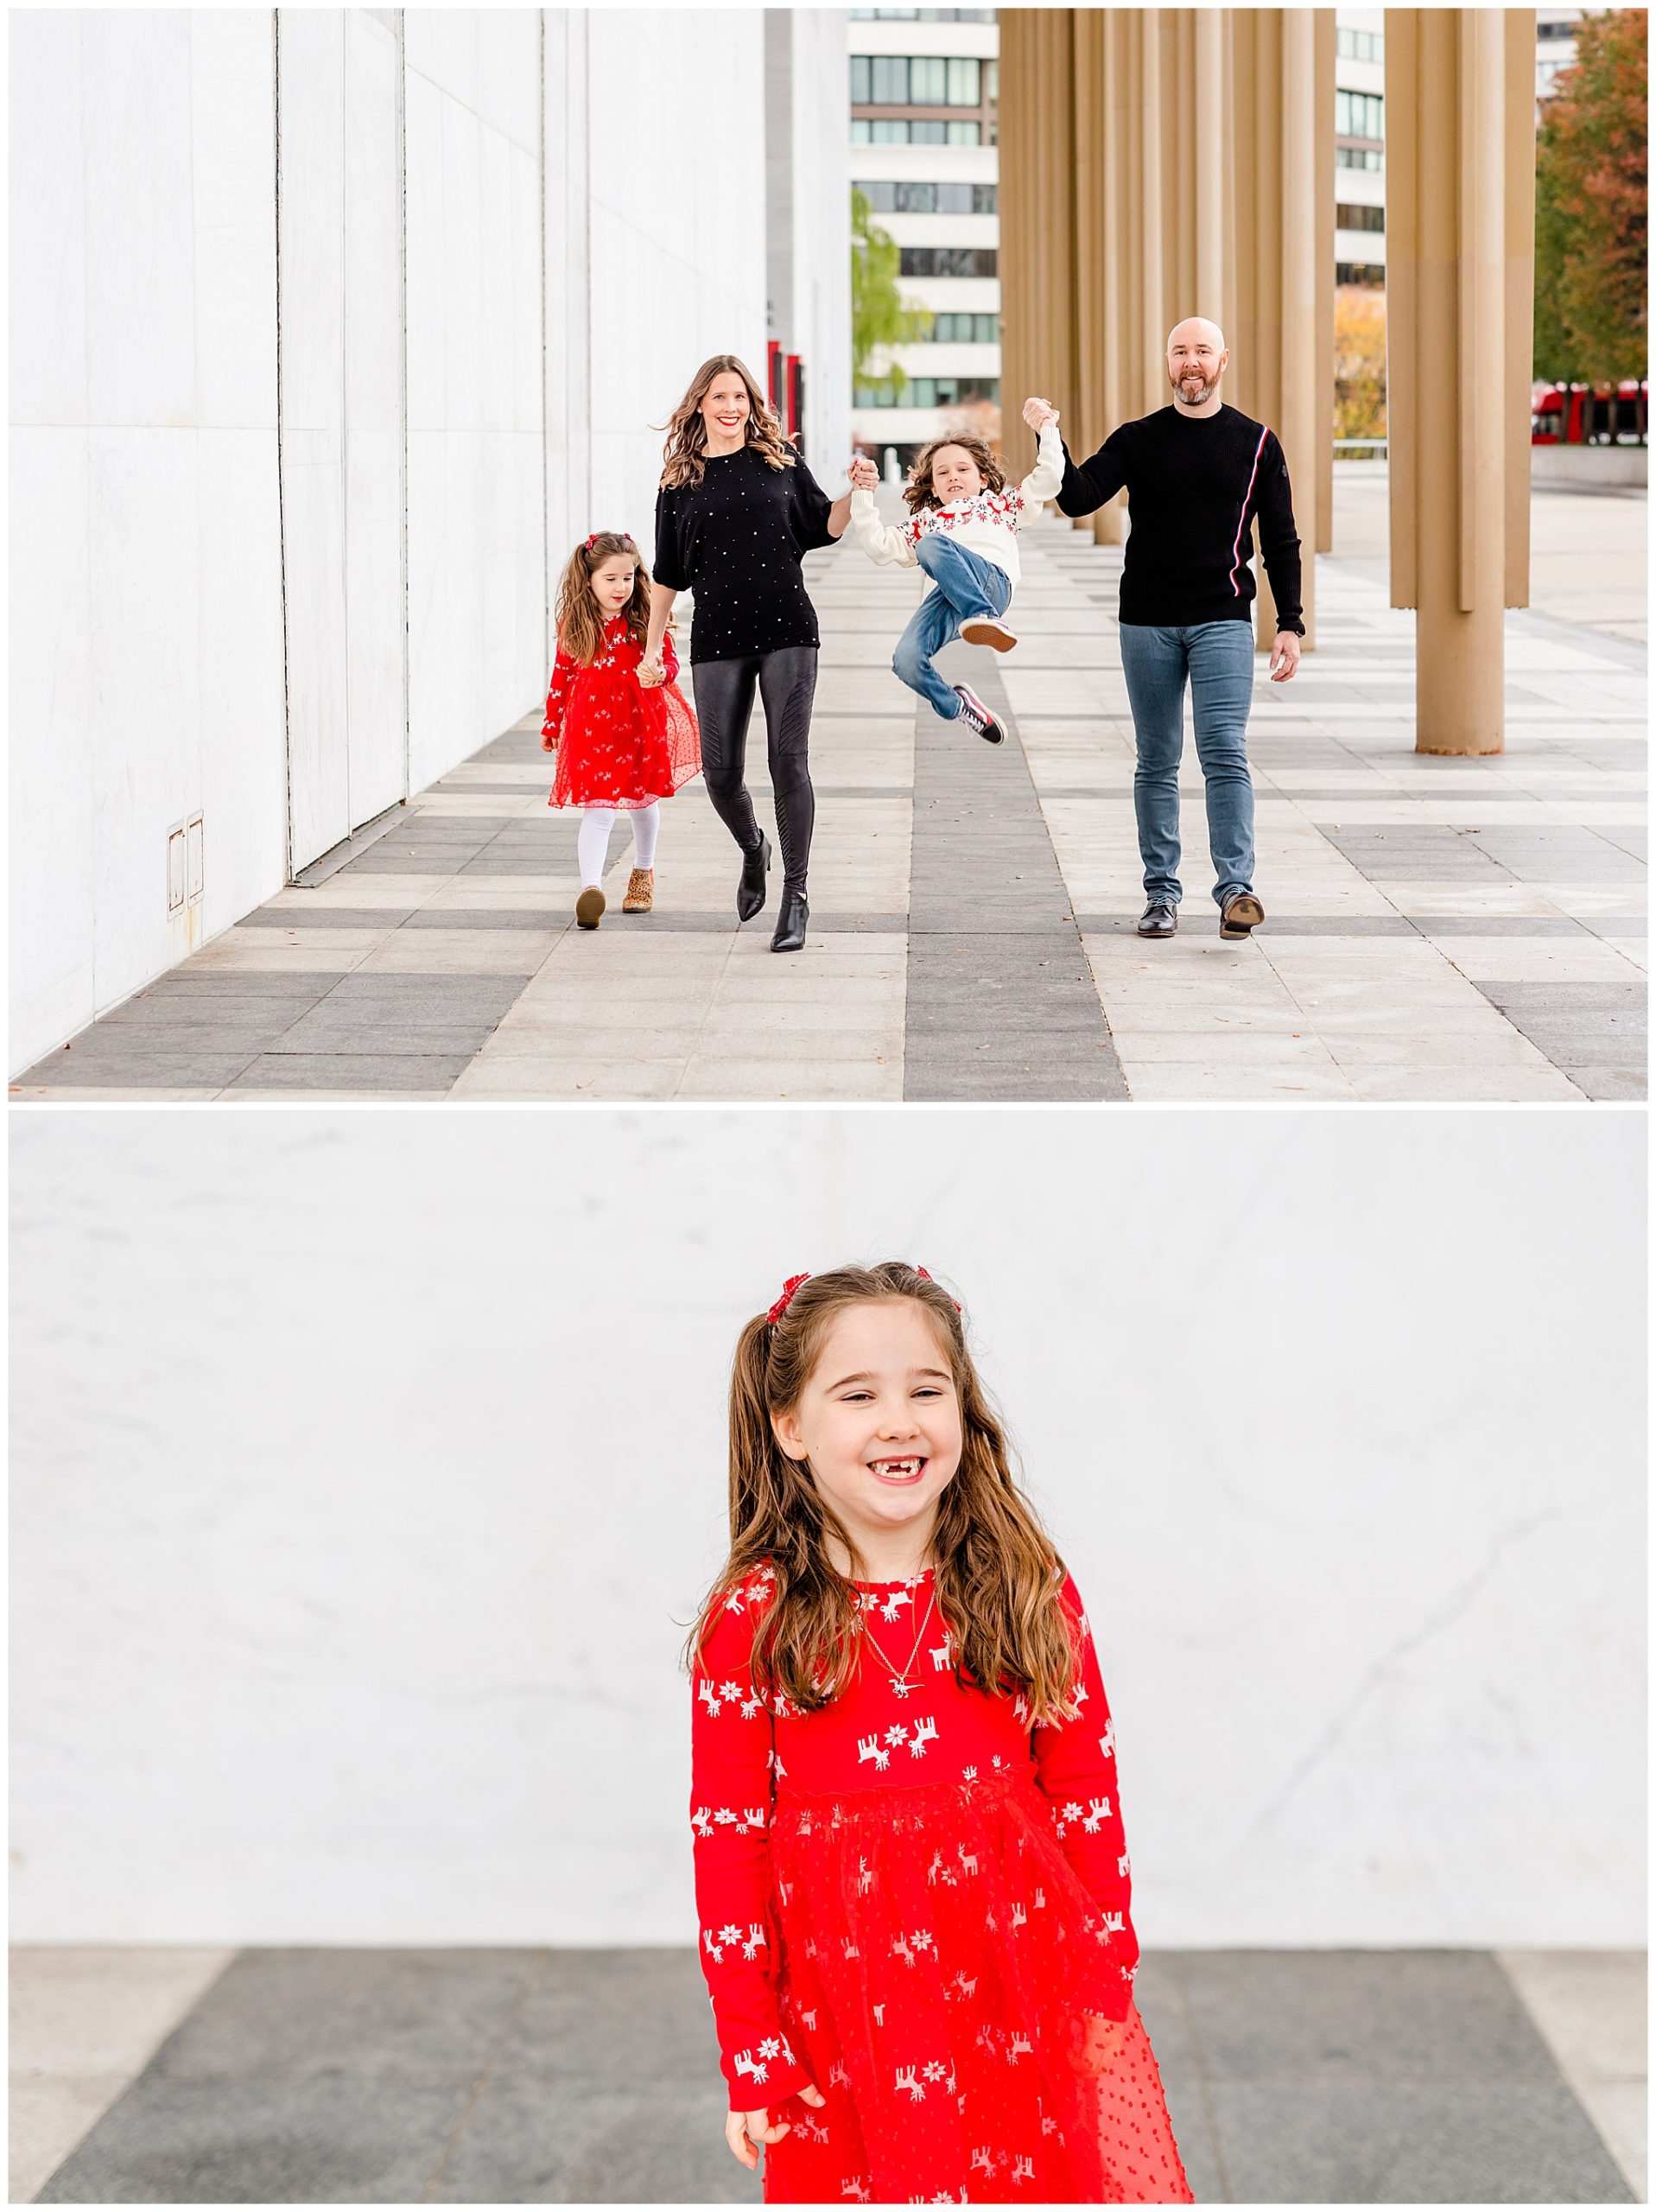 family photography session tips, family session tips, family photography tips, family photo shoot tips, ideas for family photos, Arlington Virginia photographer, family mini sessions, Rachel E.H. Photography, Washington D.C. photographer, parents lifting kid in air, parents walking with kids, girl in red dress